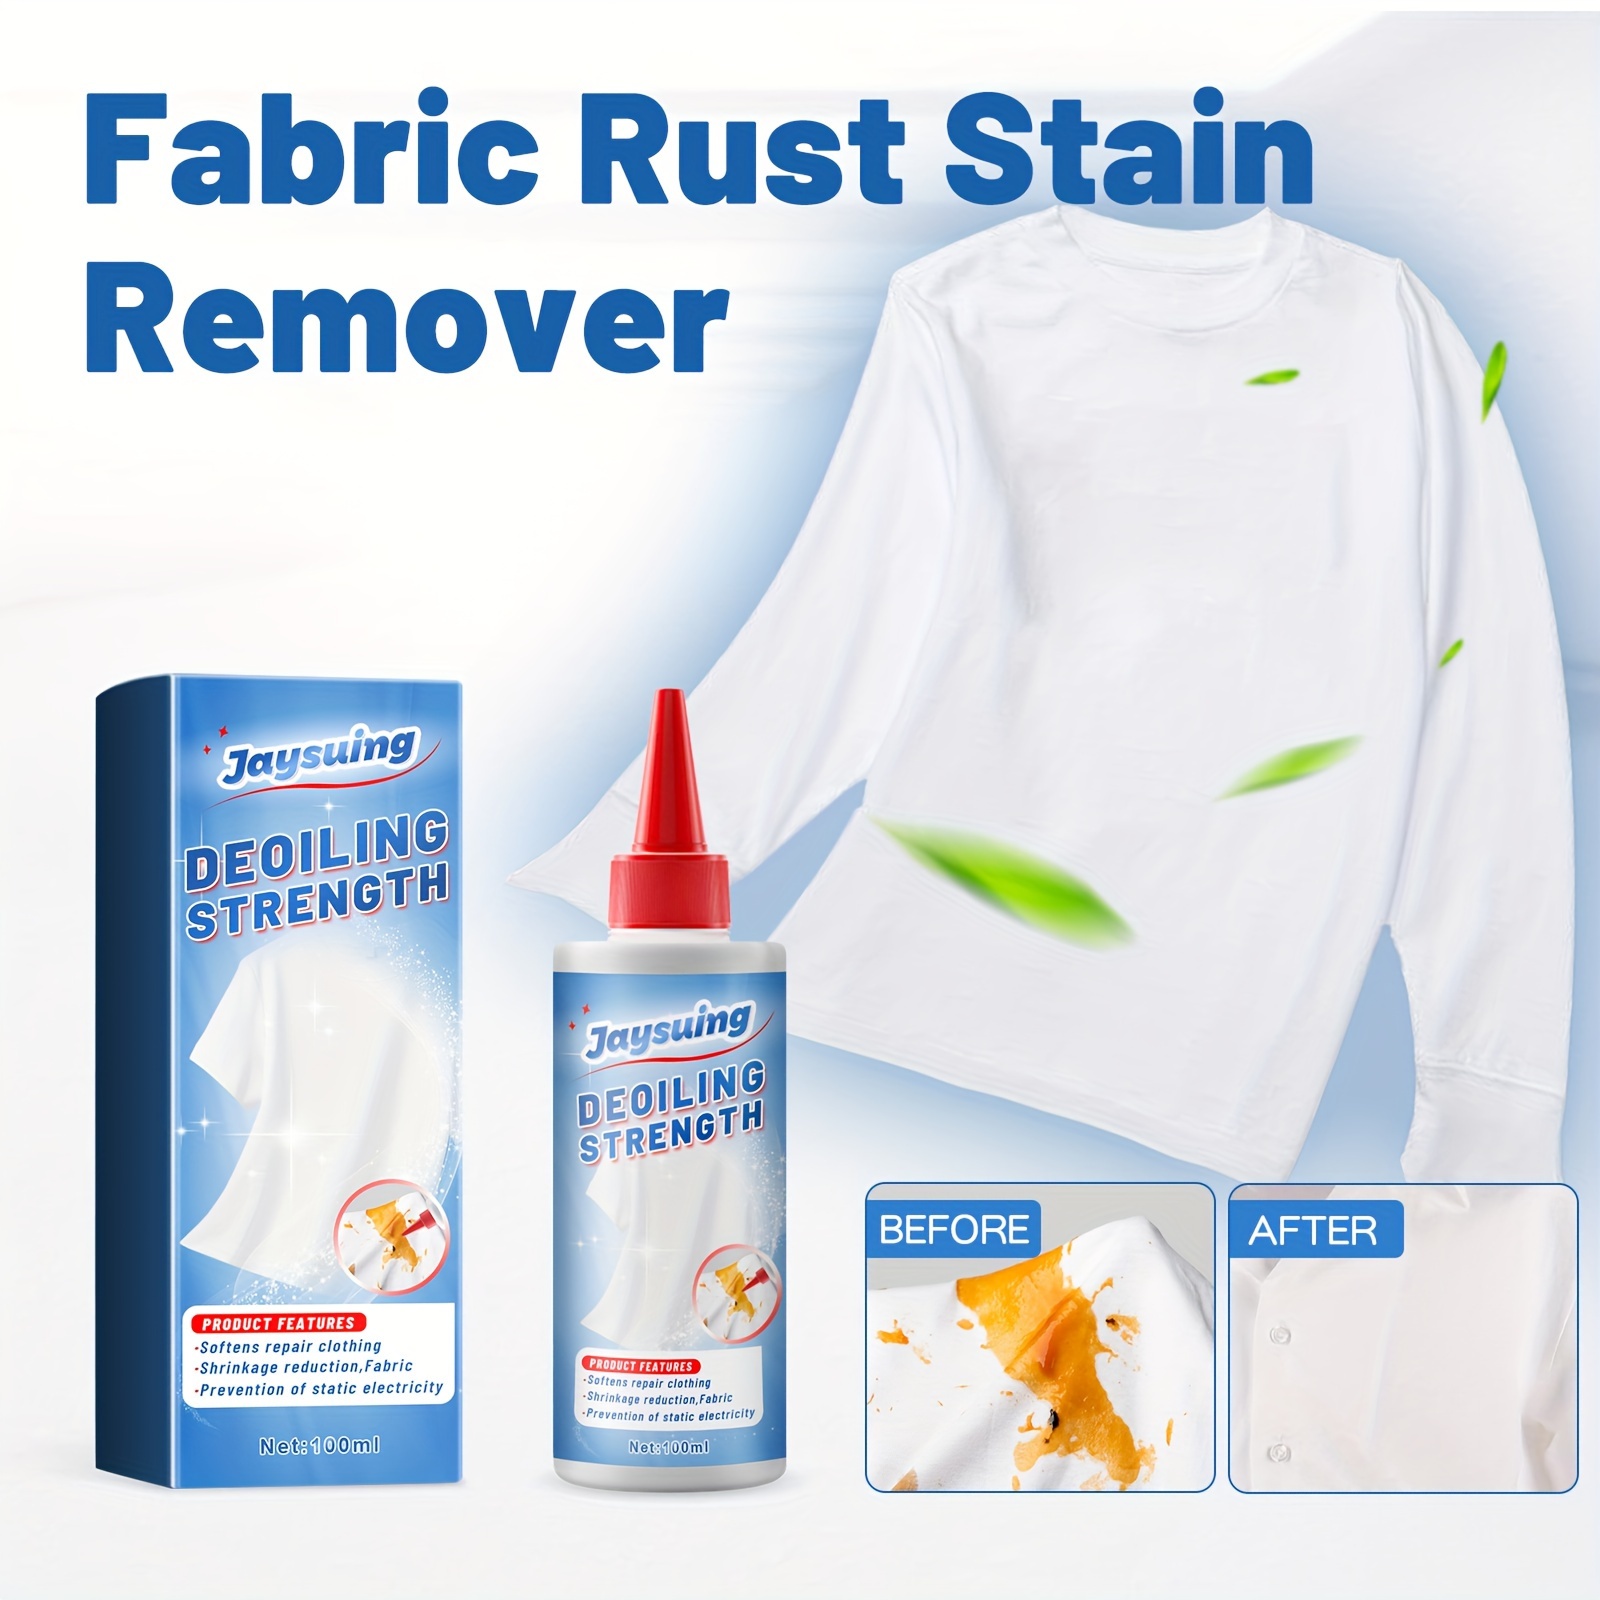 Ultimate Clothing Cleaner For Hotel: Deep Clean Stubborn Stains, Oil ...